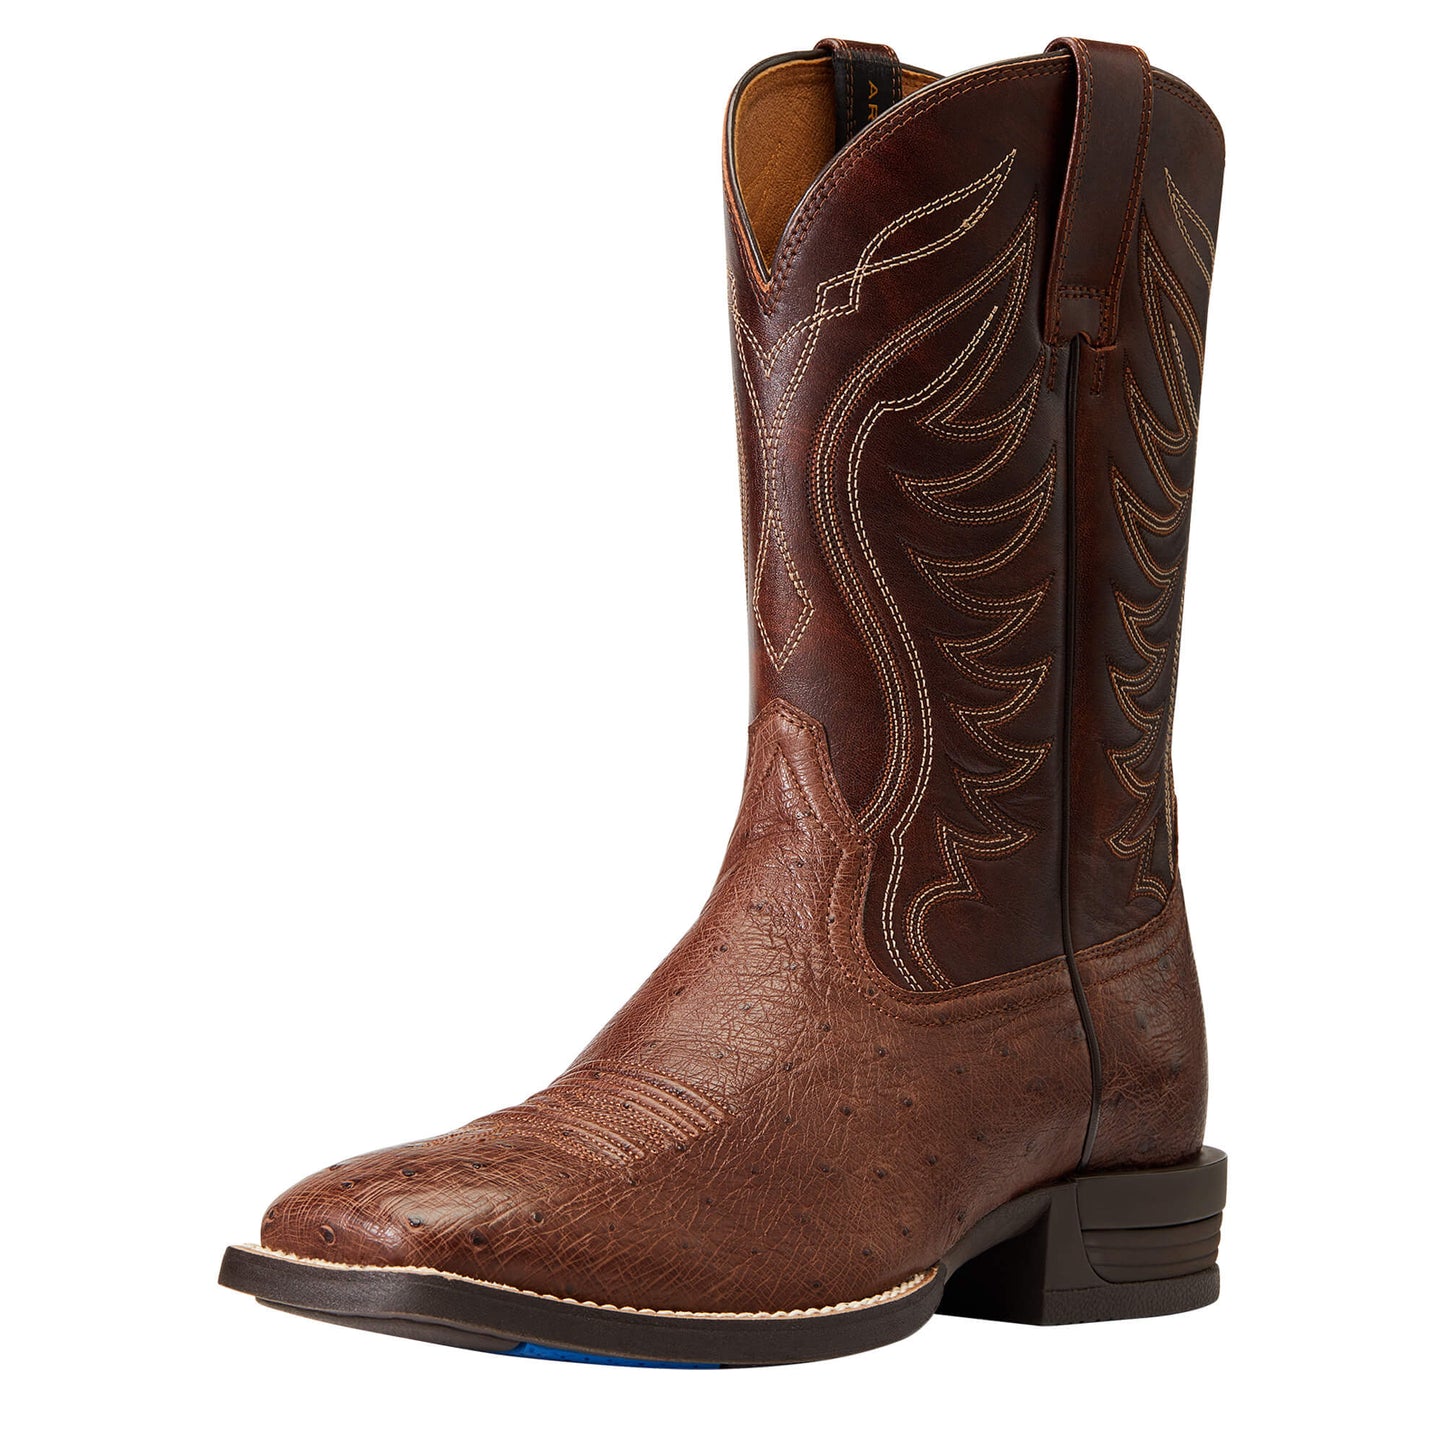 10042473 Ariat Mns Reckoning Dark Tabac Smooth Quill Ostrich/Nut Brown Boots